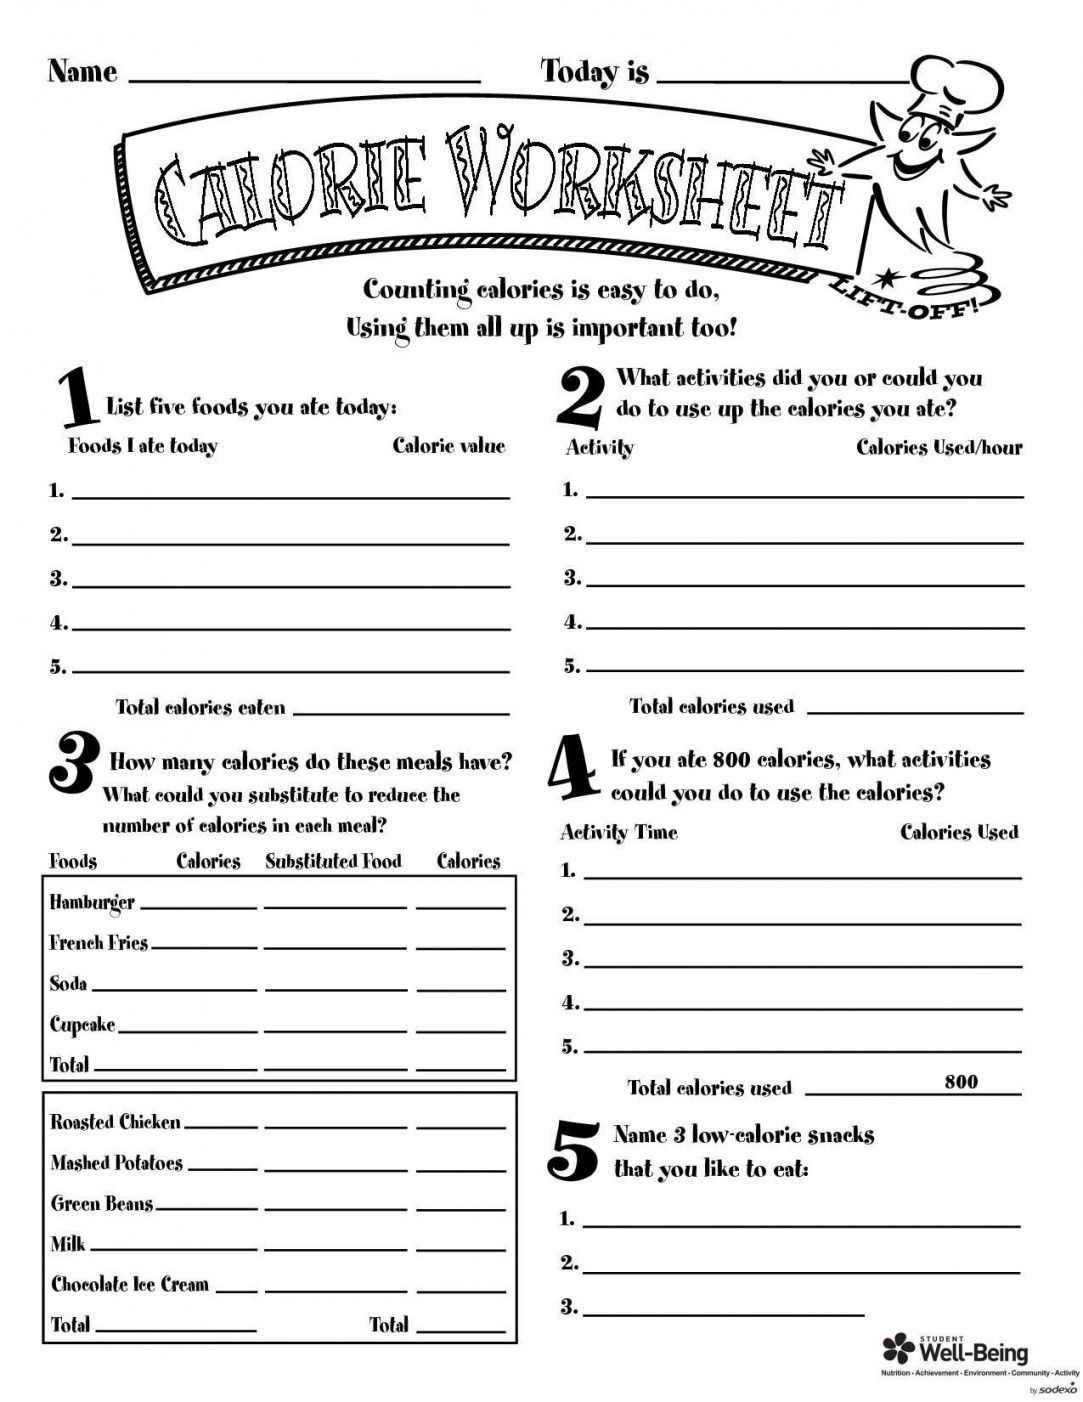 Free Printable Health Worksheets For Middle School | Lostranquillos - Free Printable Health Worksheets For Middle School